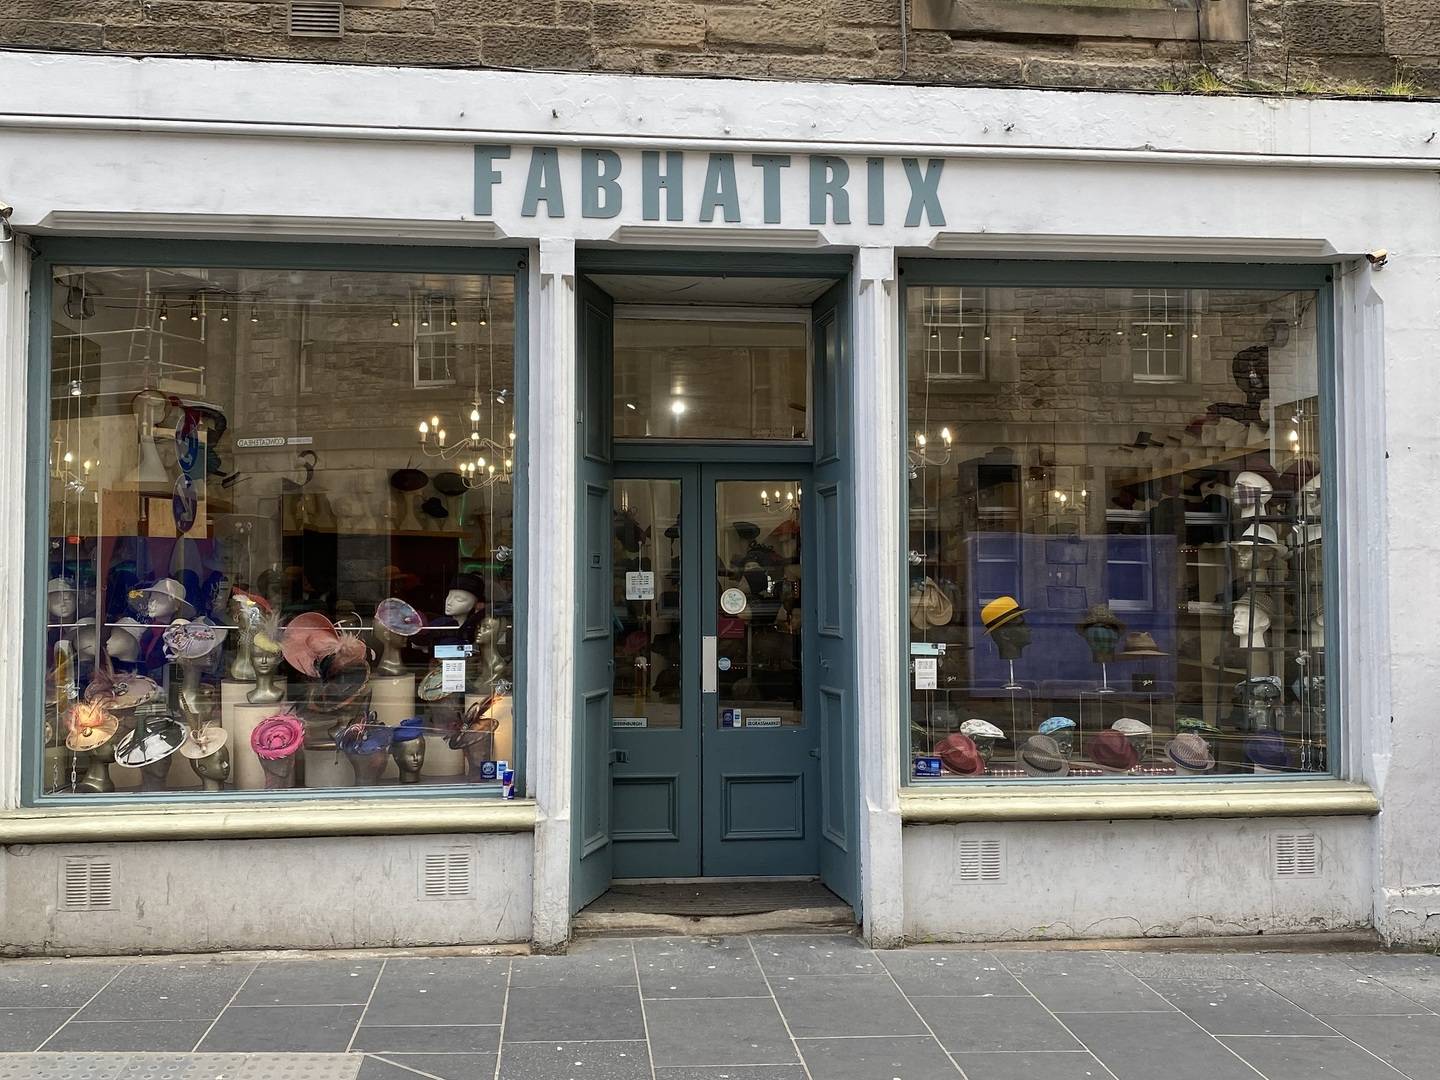 Image of FabHatrix window full of hats on stands